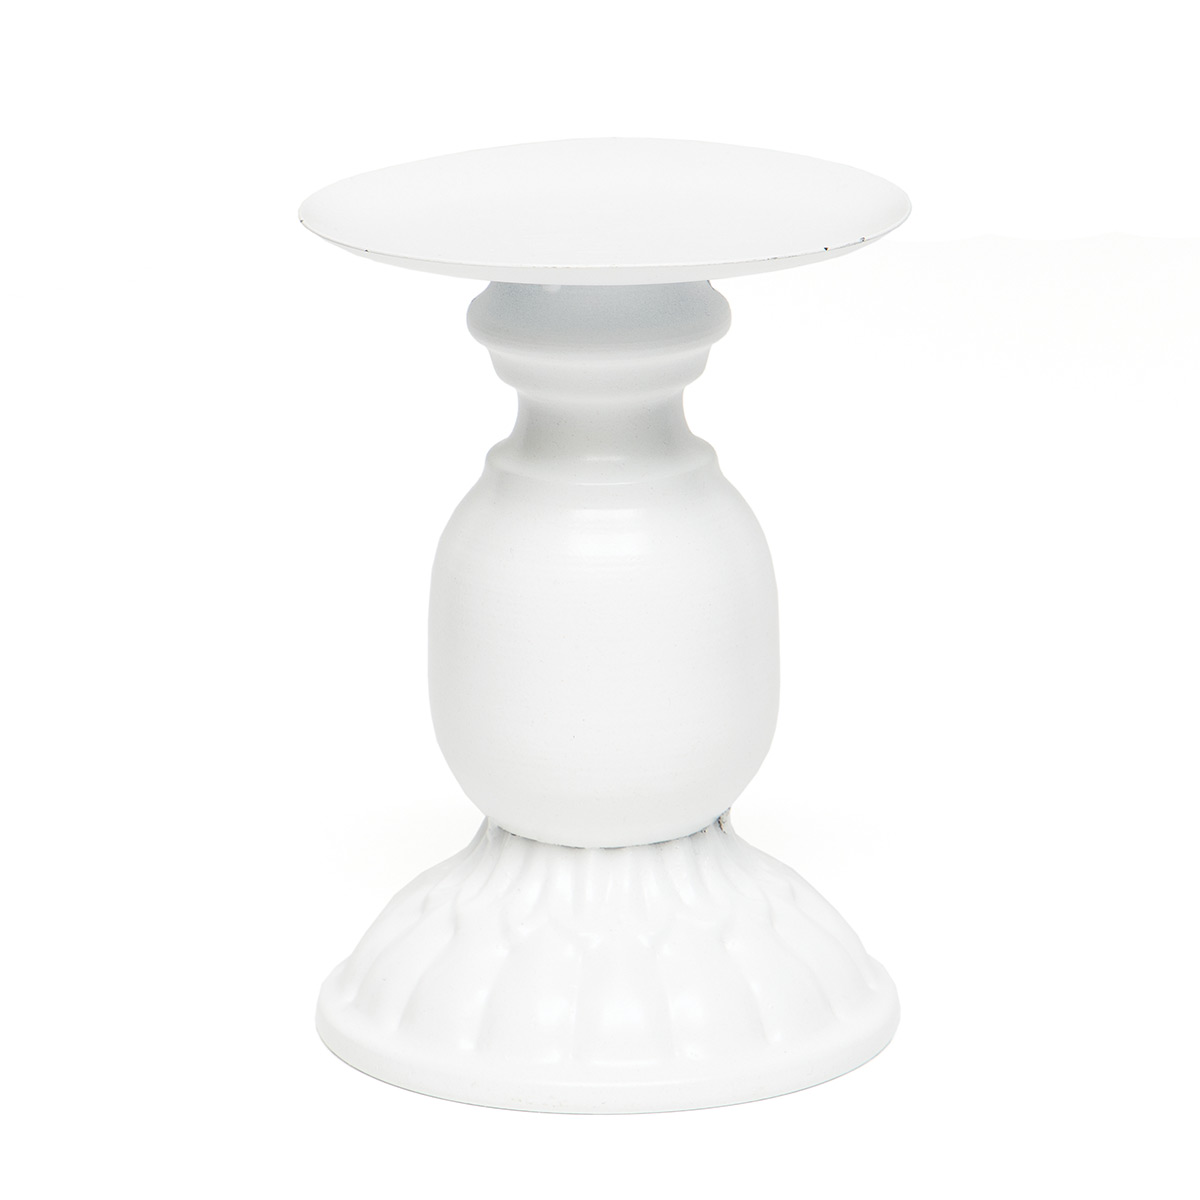 CANDLEHOLDER SMALL 3.5IN X 5.5IN MATTE WHITE METAL